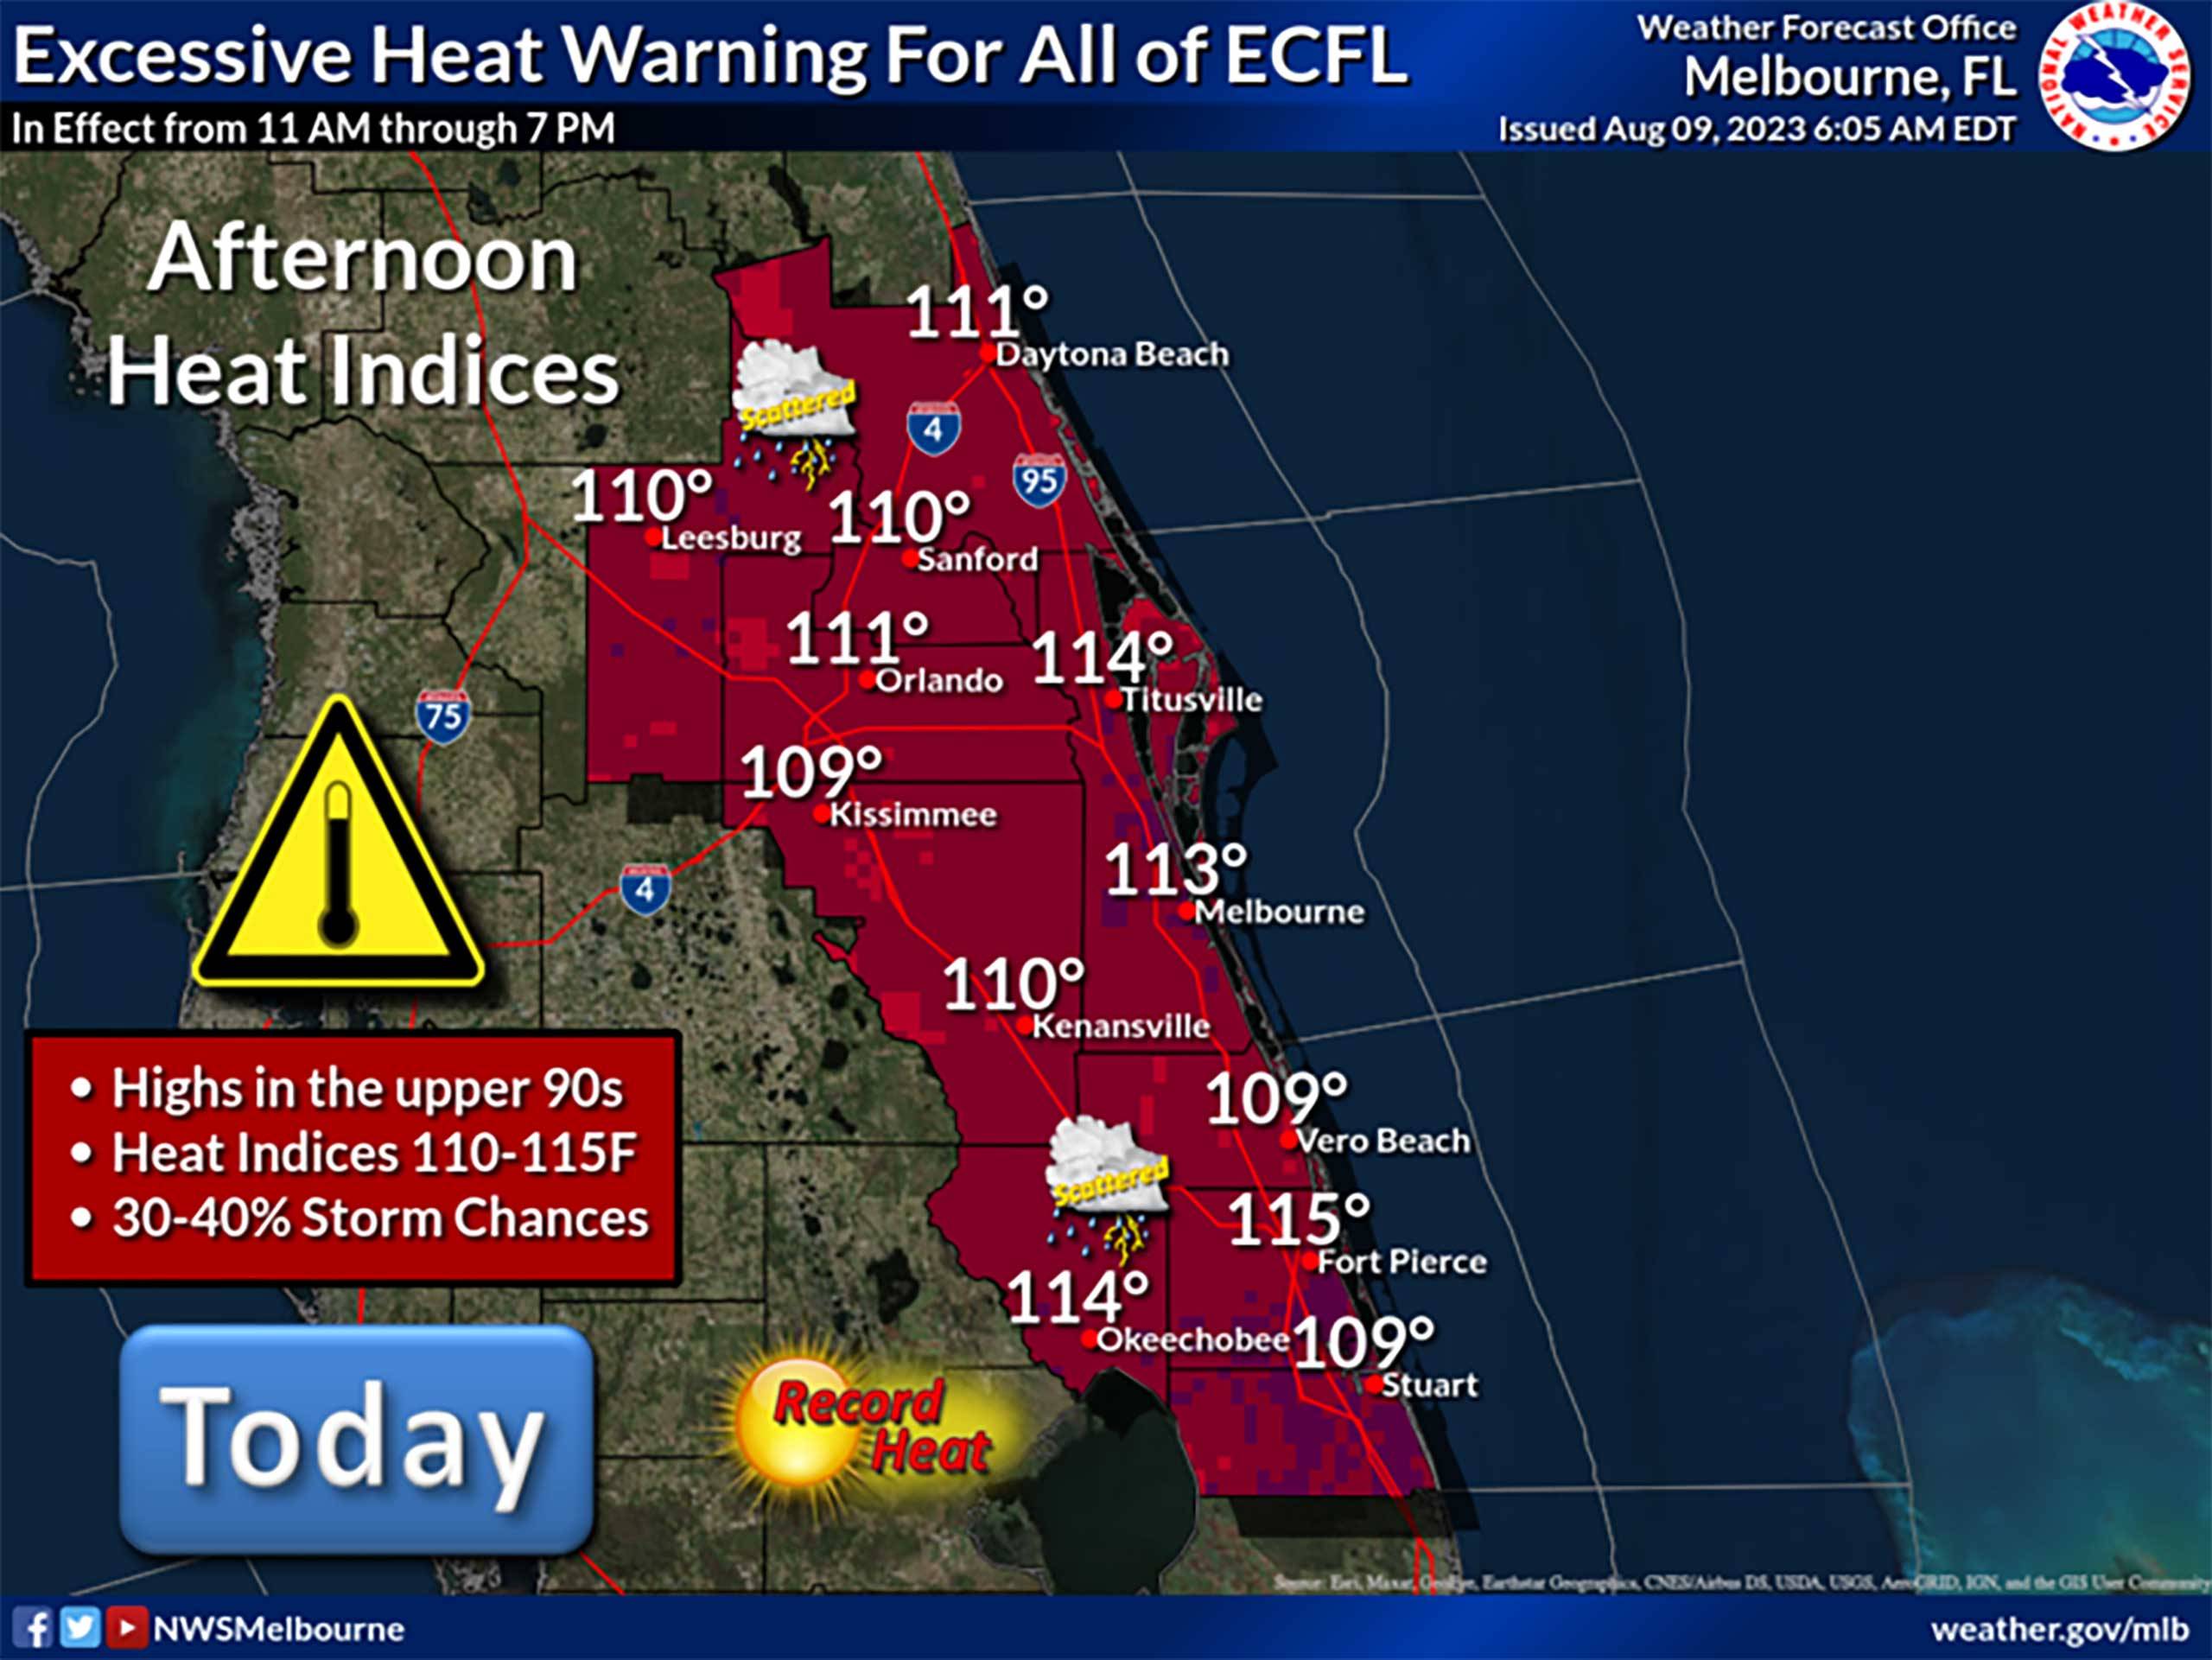 National Weather Service issues an Excessive Heat Warning for the Walt Disney World theme park area